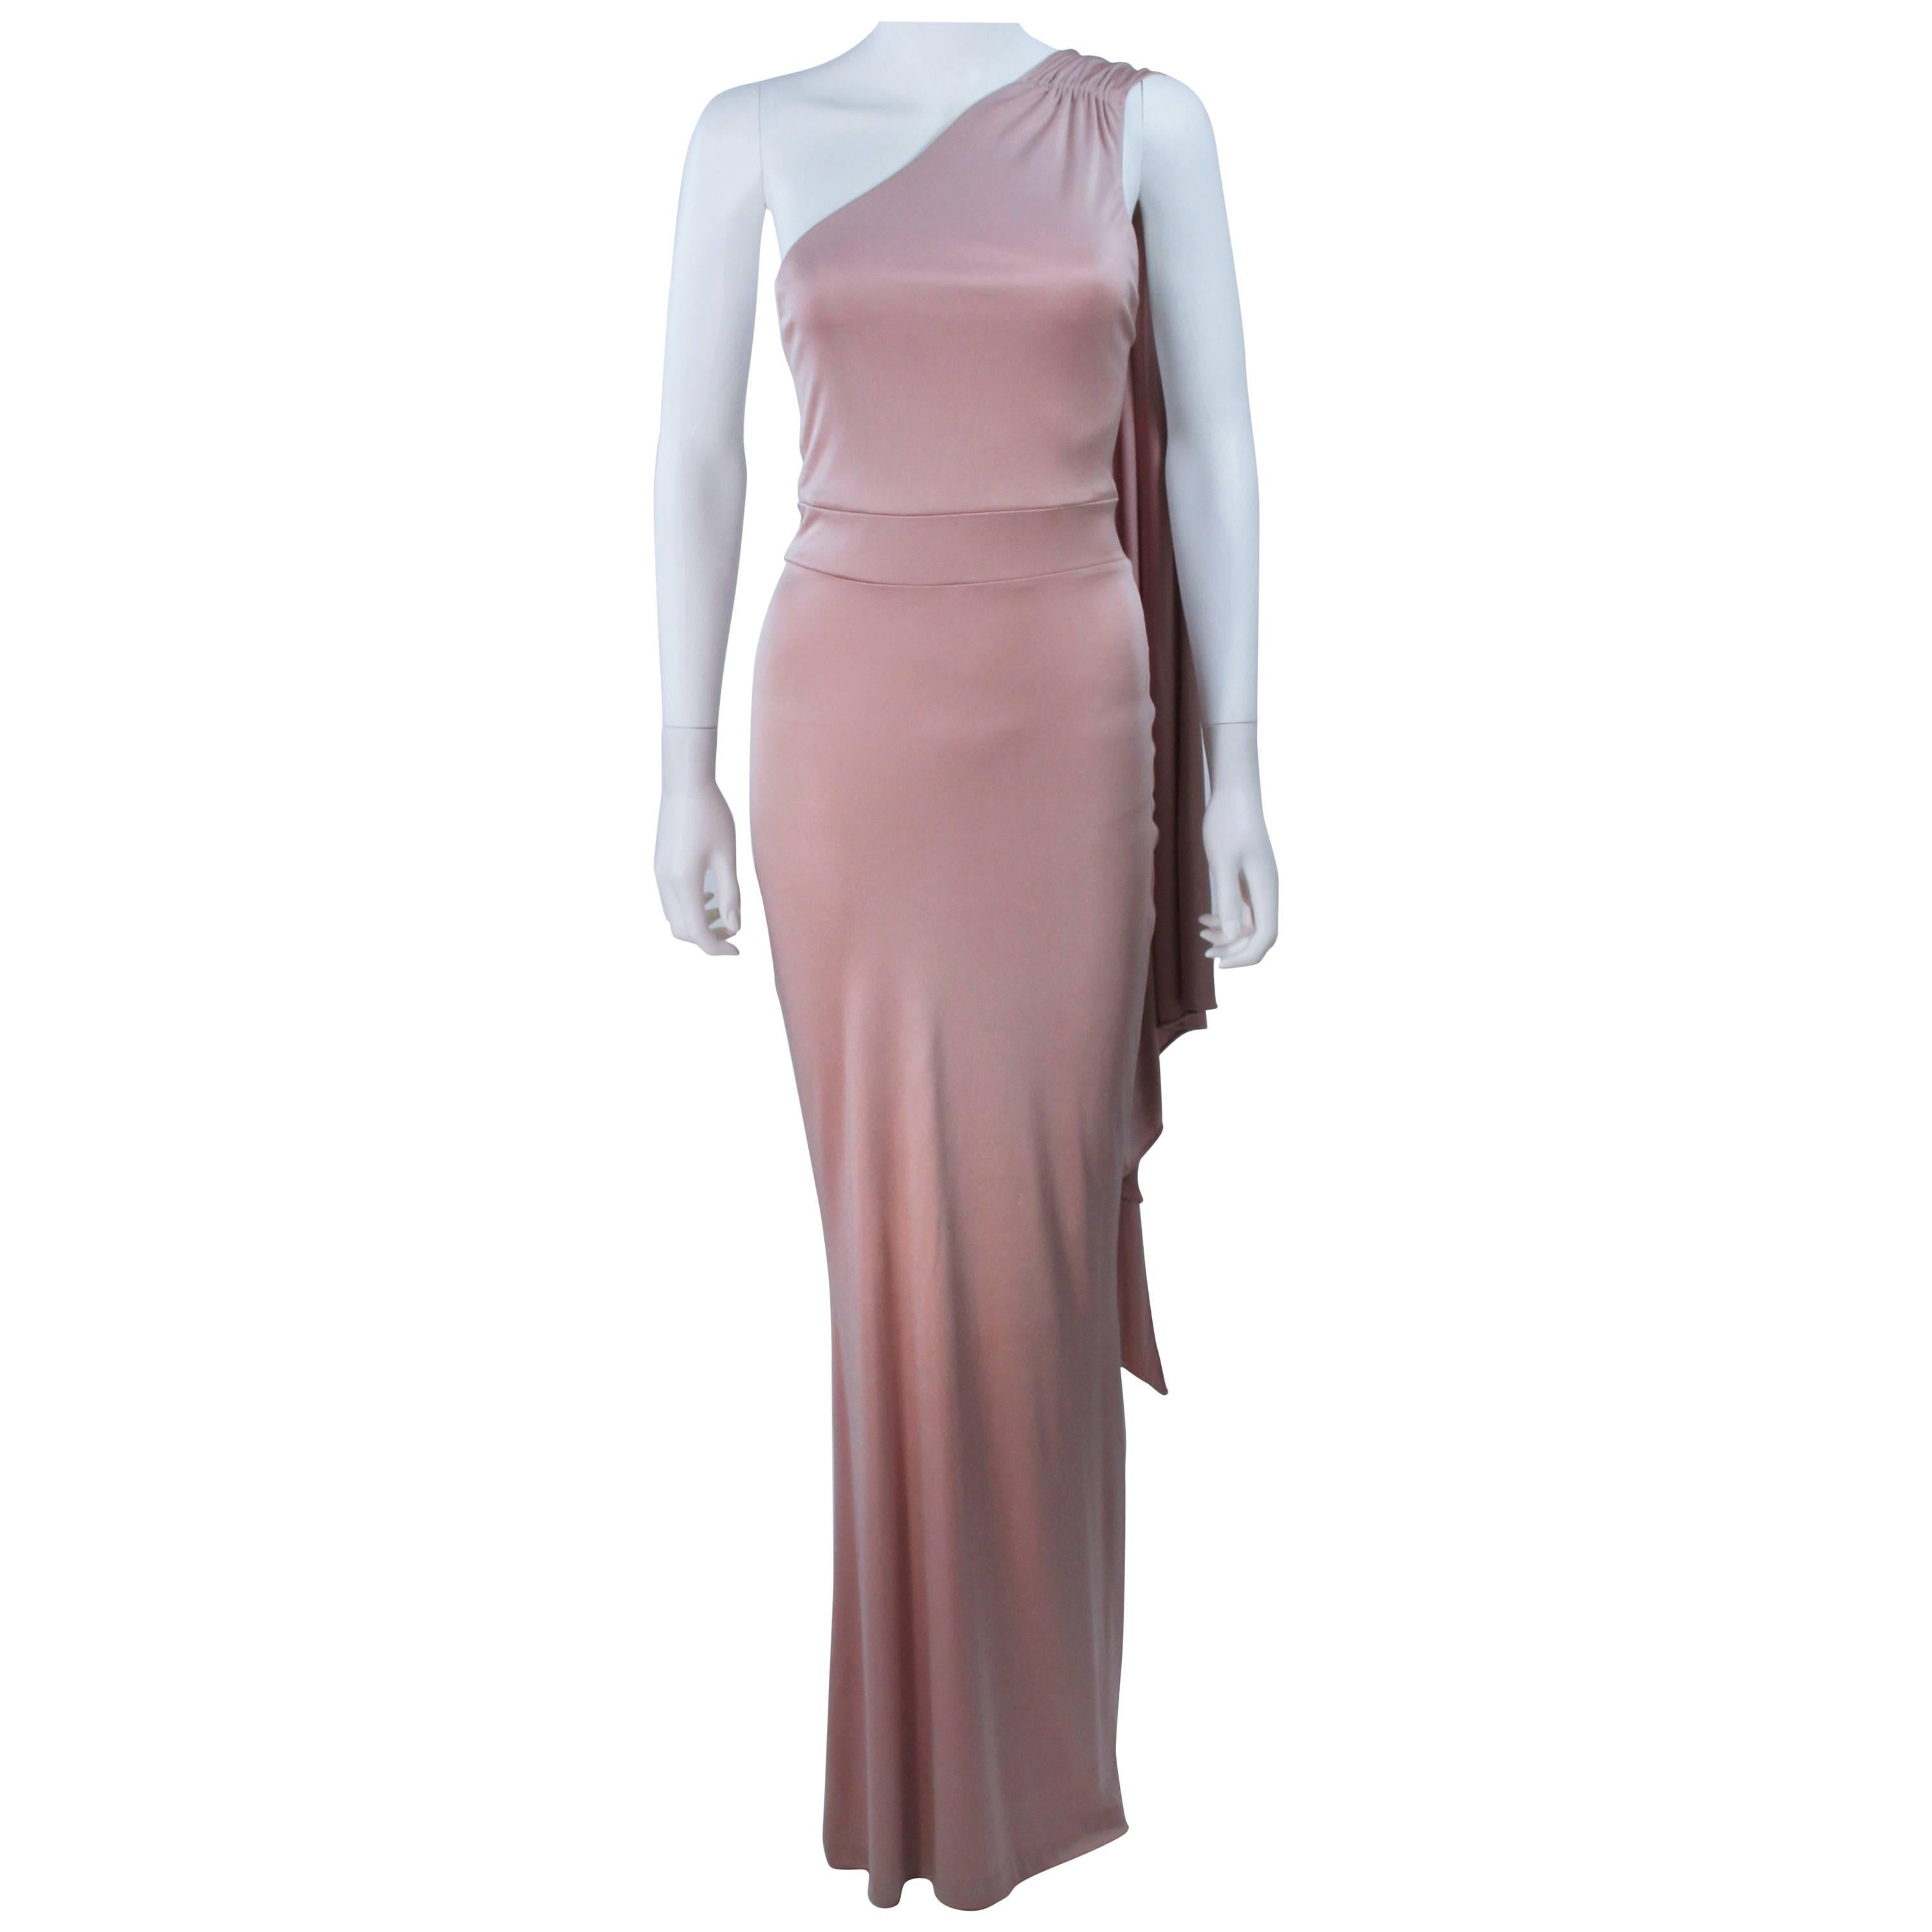 ELIZABETH MASON COUTURE Deep Blush One Shoulder Draped Gown Made to Order